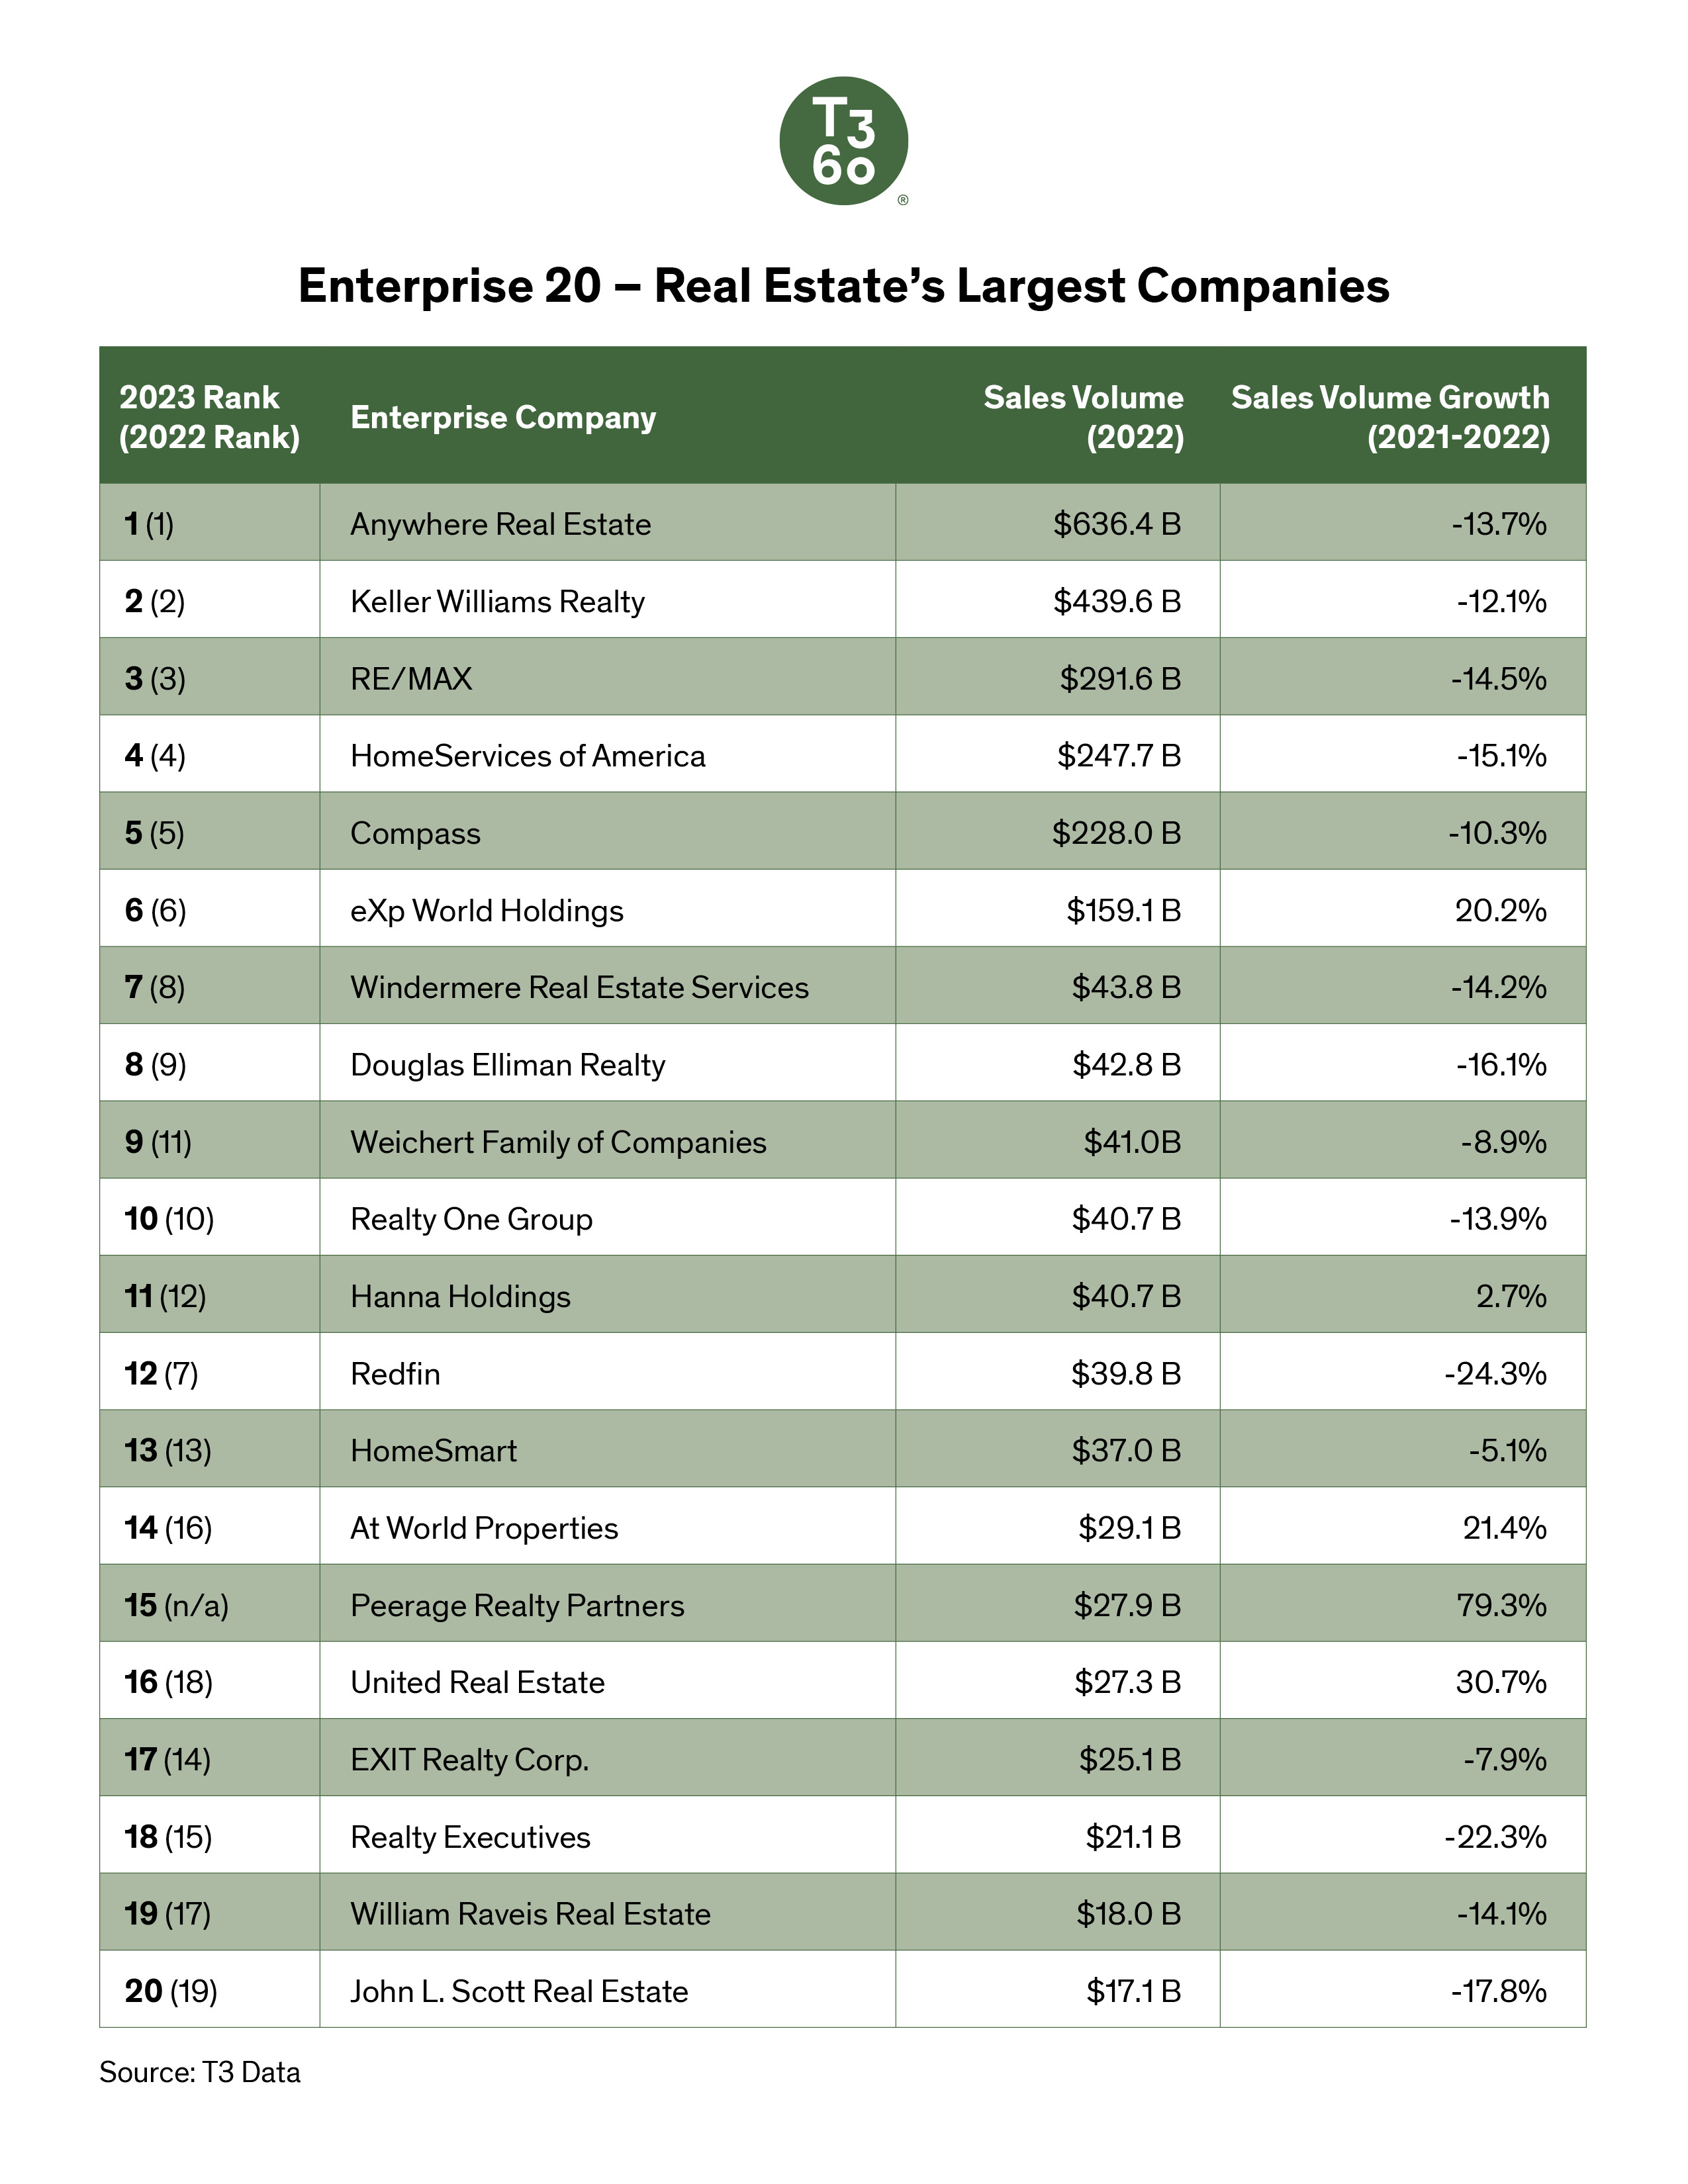 Growth among nation's 20 largest real estate companies traced back to acquisition activity and franchise expansion